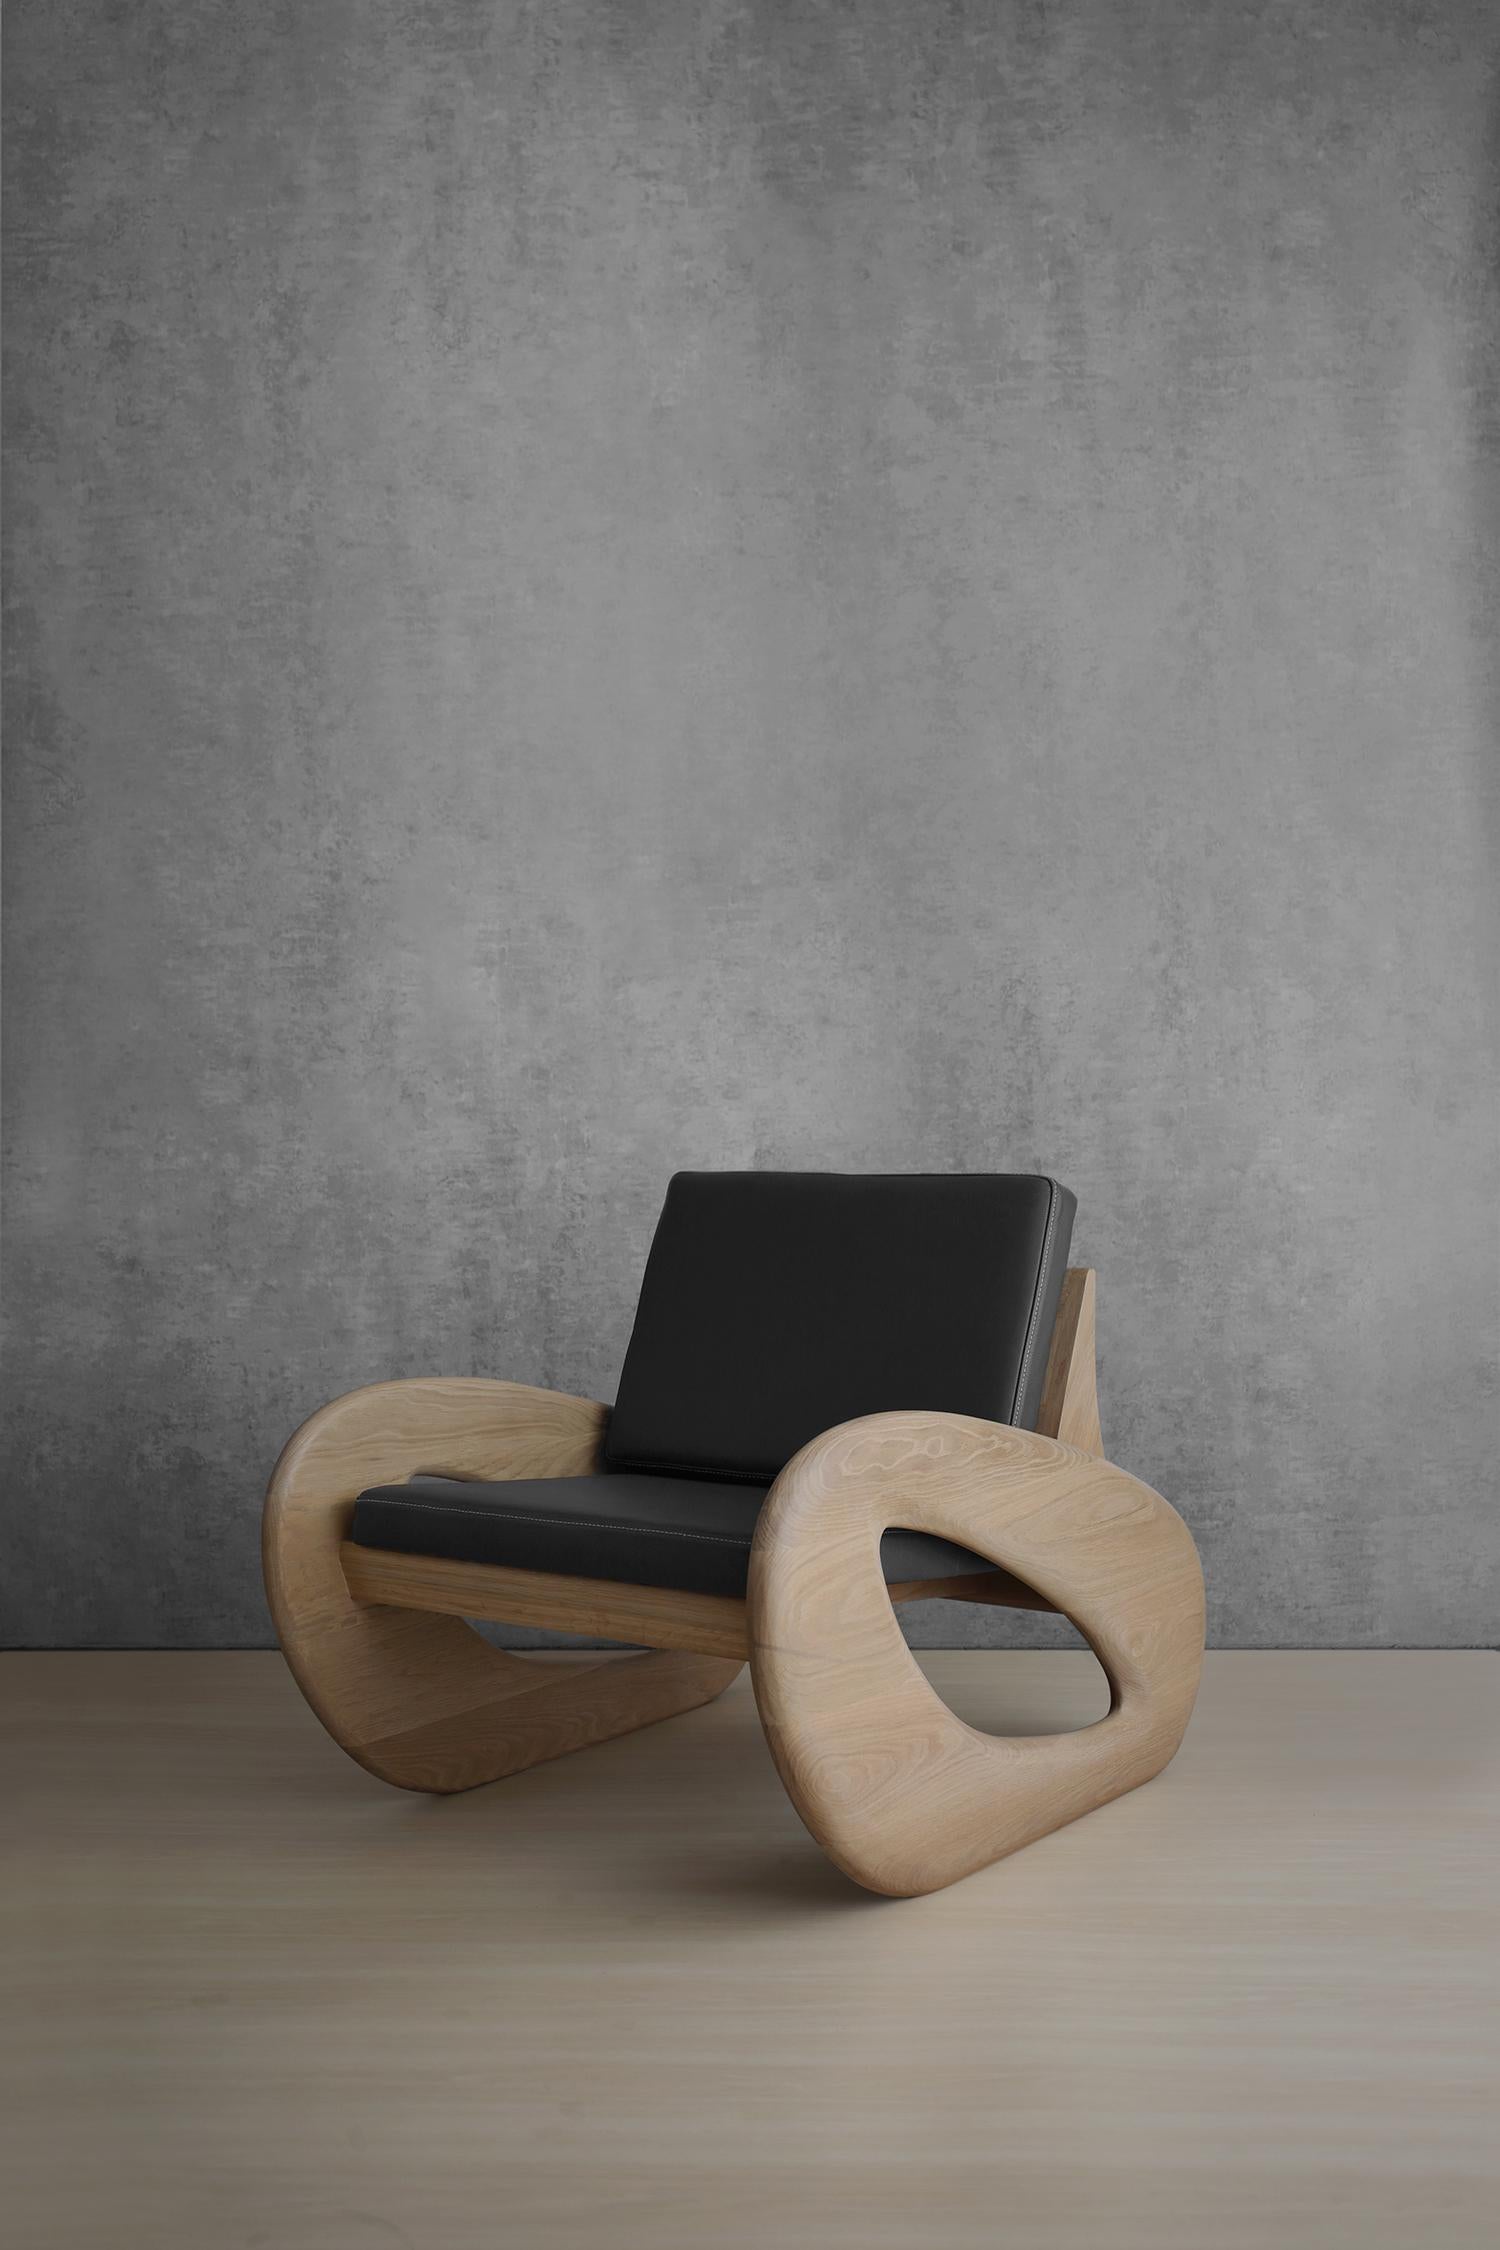 XVII Sherman lounge chair by Arturo Verástegui.
Dimensions: D 82 x W 109 x H 81 cm.
Materials: oak wood, leather.

Lounge chair made of white oak or burnt finish white oak option and leather.

Arturo Verástegui has been the director and